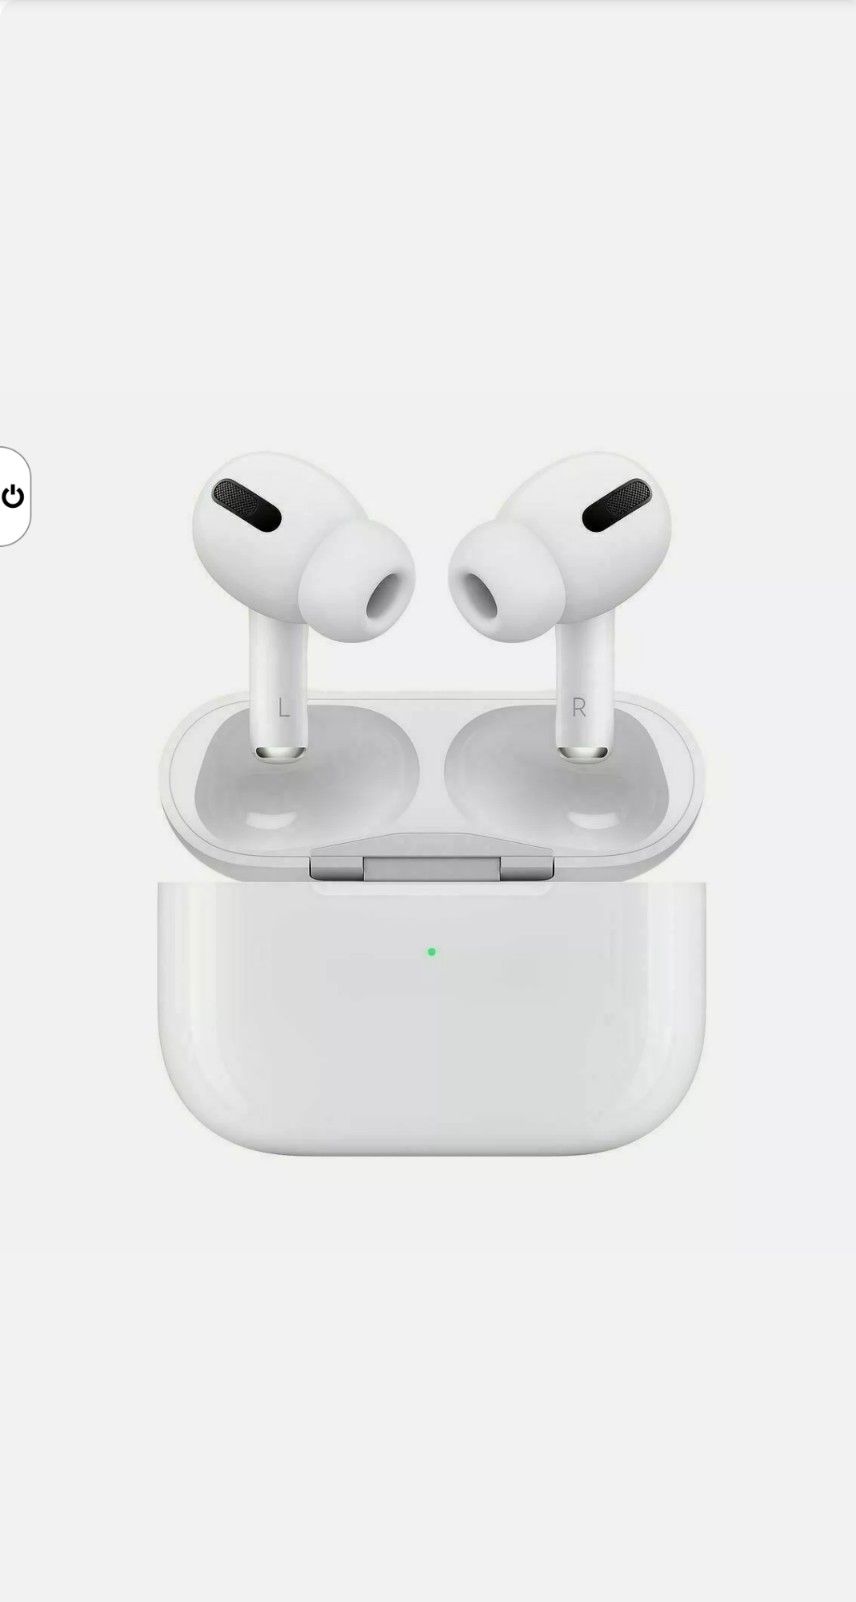 Brand new airpods pro with two cases $120 obo